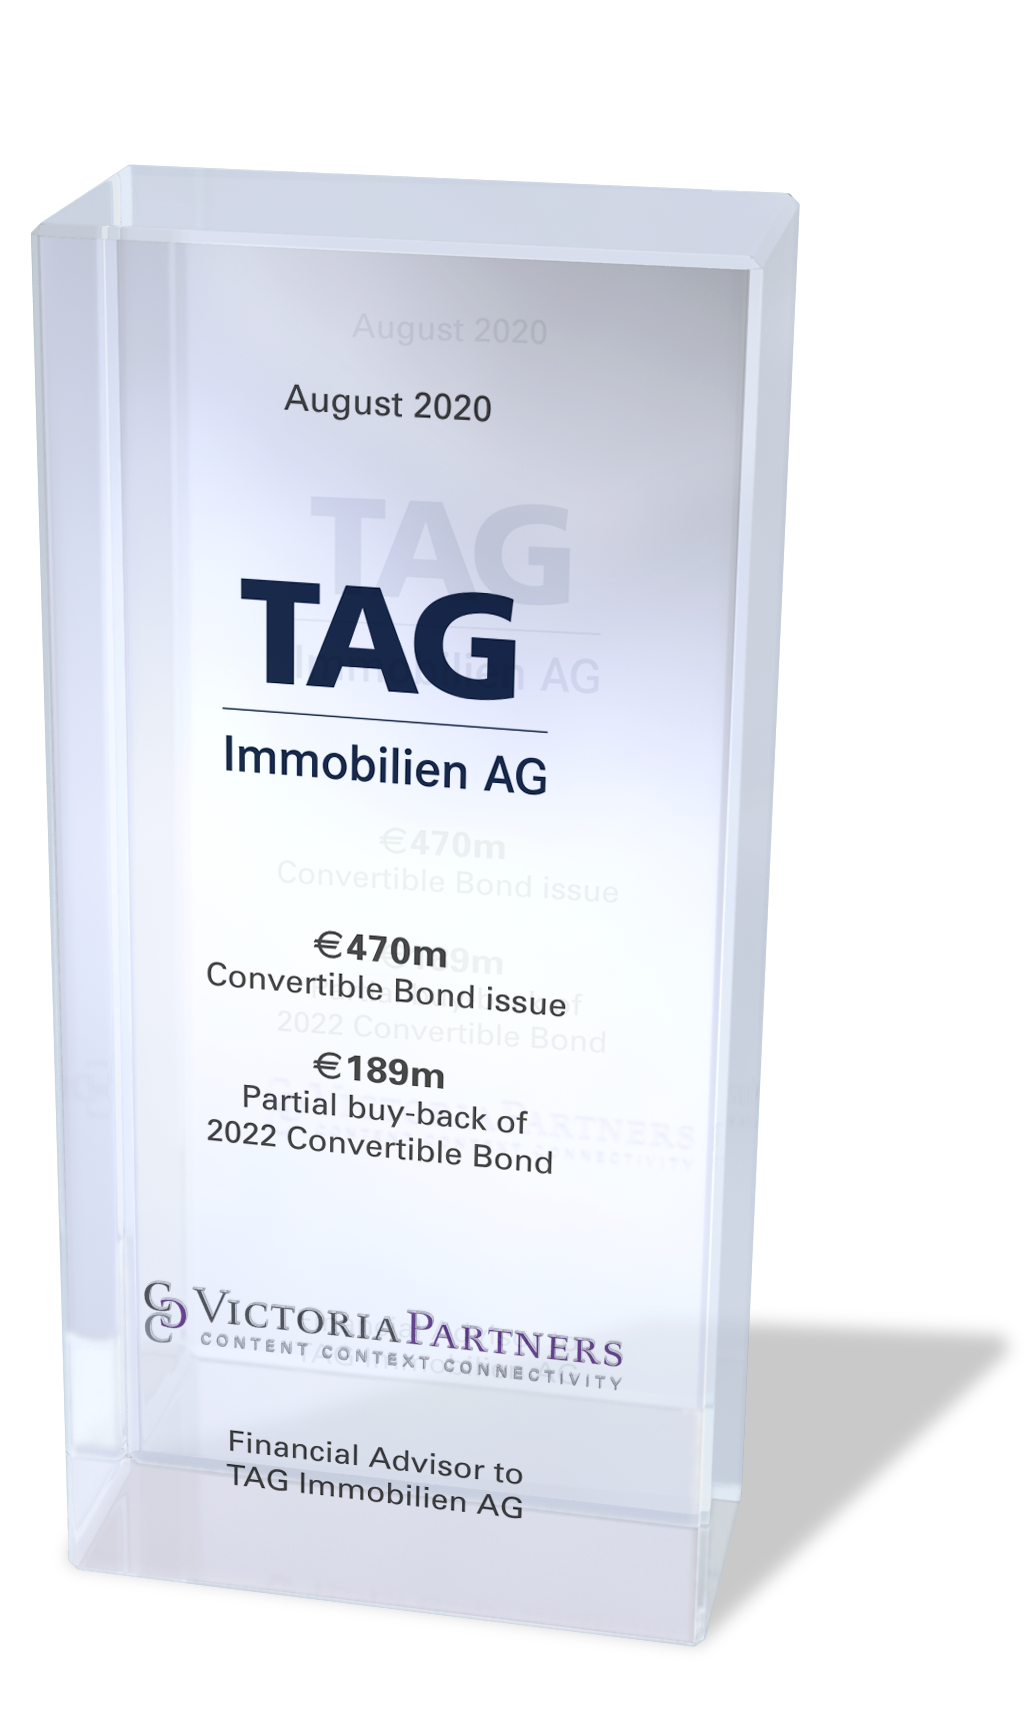 VICTORIAPARTNERS - Financial Advisor to TAG Immobilien AG - August 2020